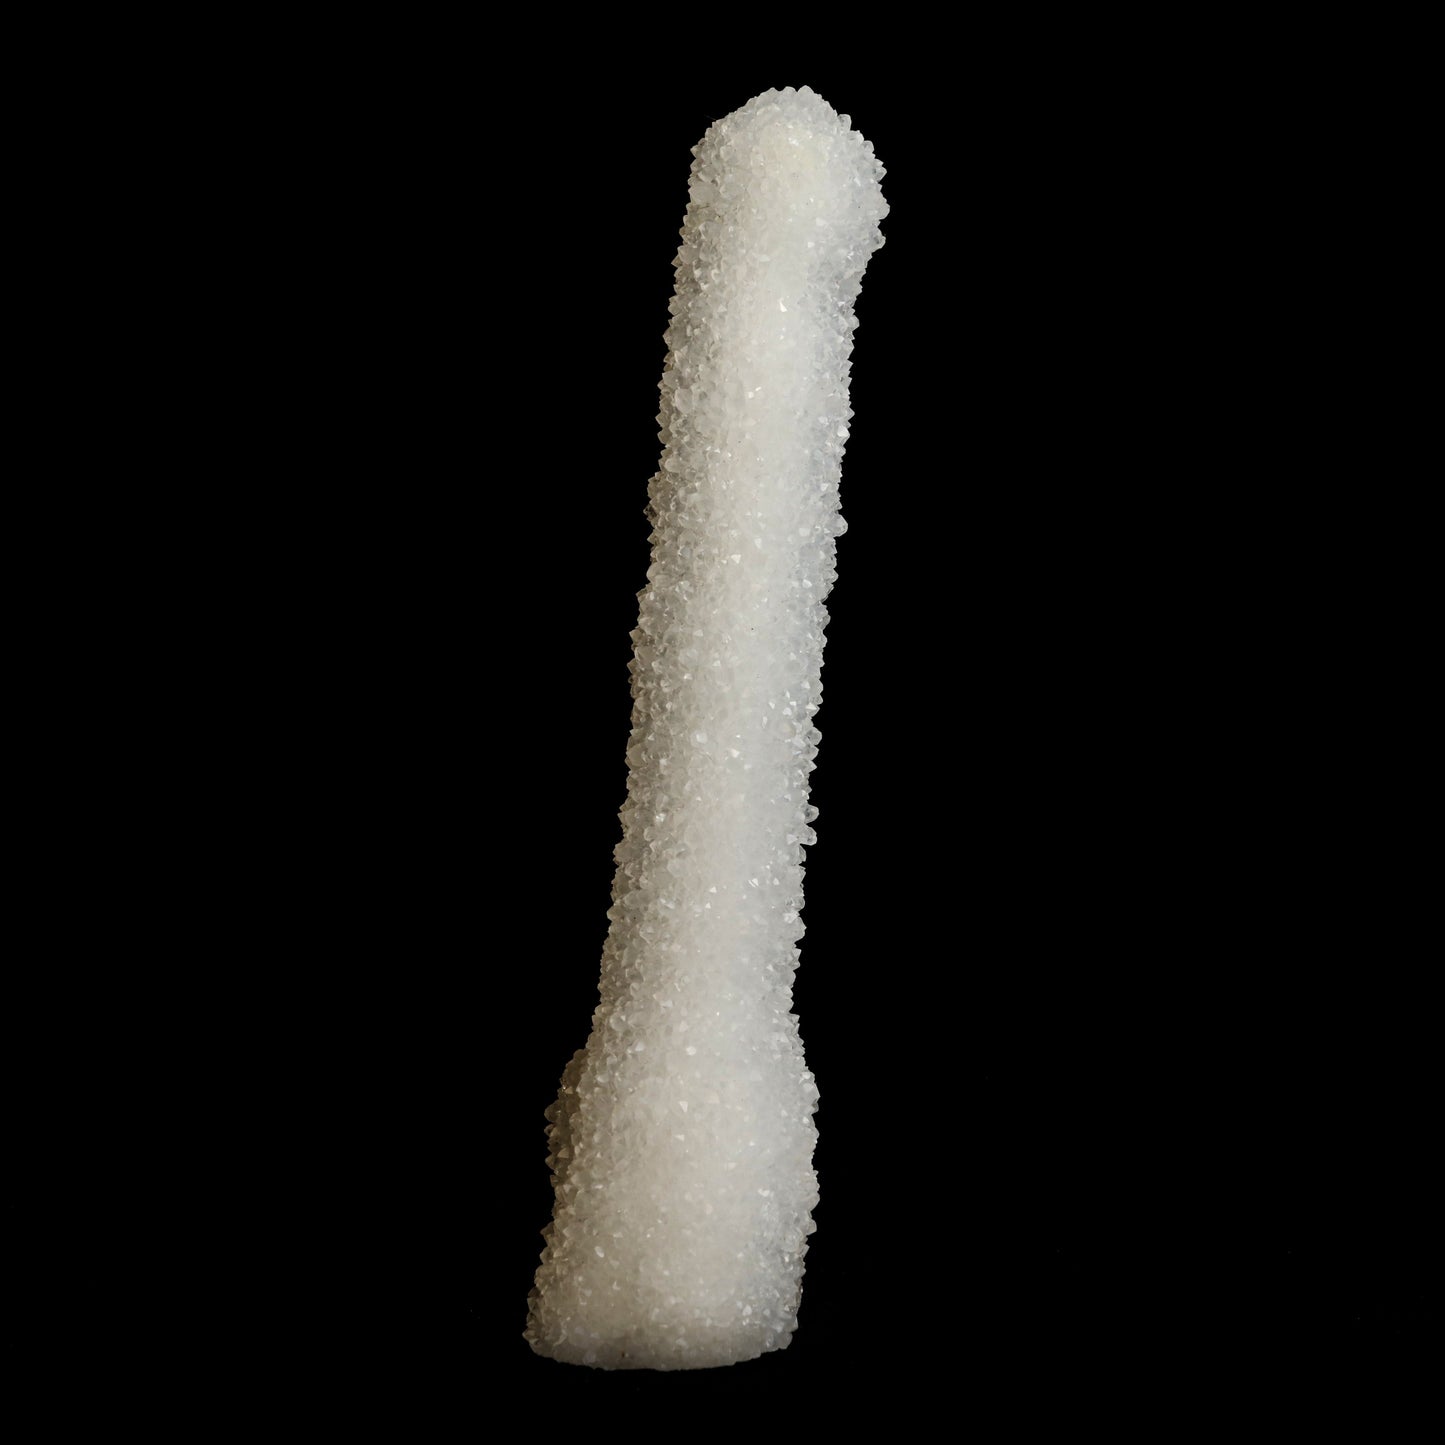 MM Quartz Stalactite Natural Mineral Specimen # B 5029  https://www.superbminerals.us/products/mm-quartz-stalactite-natural-mineral-specimen-b-5029  Features:&nbsp;Natural manufactured MM Quartz Stalactite from Nashik, India.This sculpture is self-standing and will look amazing in any collection, exhibition, or alter. Primary Mineral(s): MM QuartzSecondary Mineral(s): N/AMatrix: N/A 7 Inch x 2 InchWeight : 295 GmsLocality: Nashik, Maharashtra,